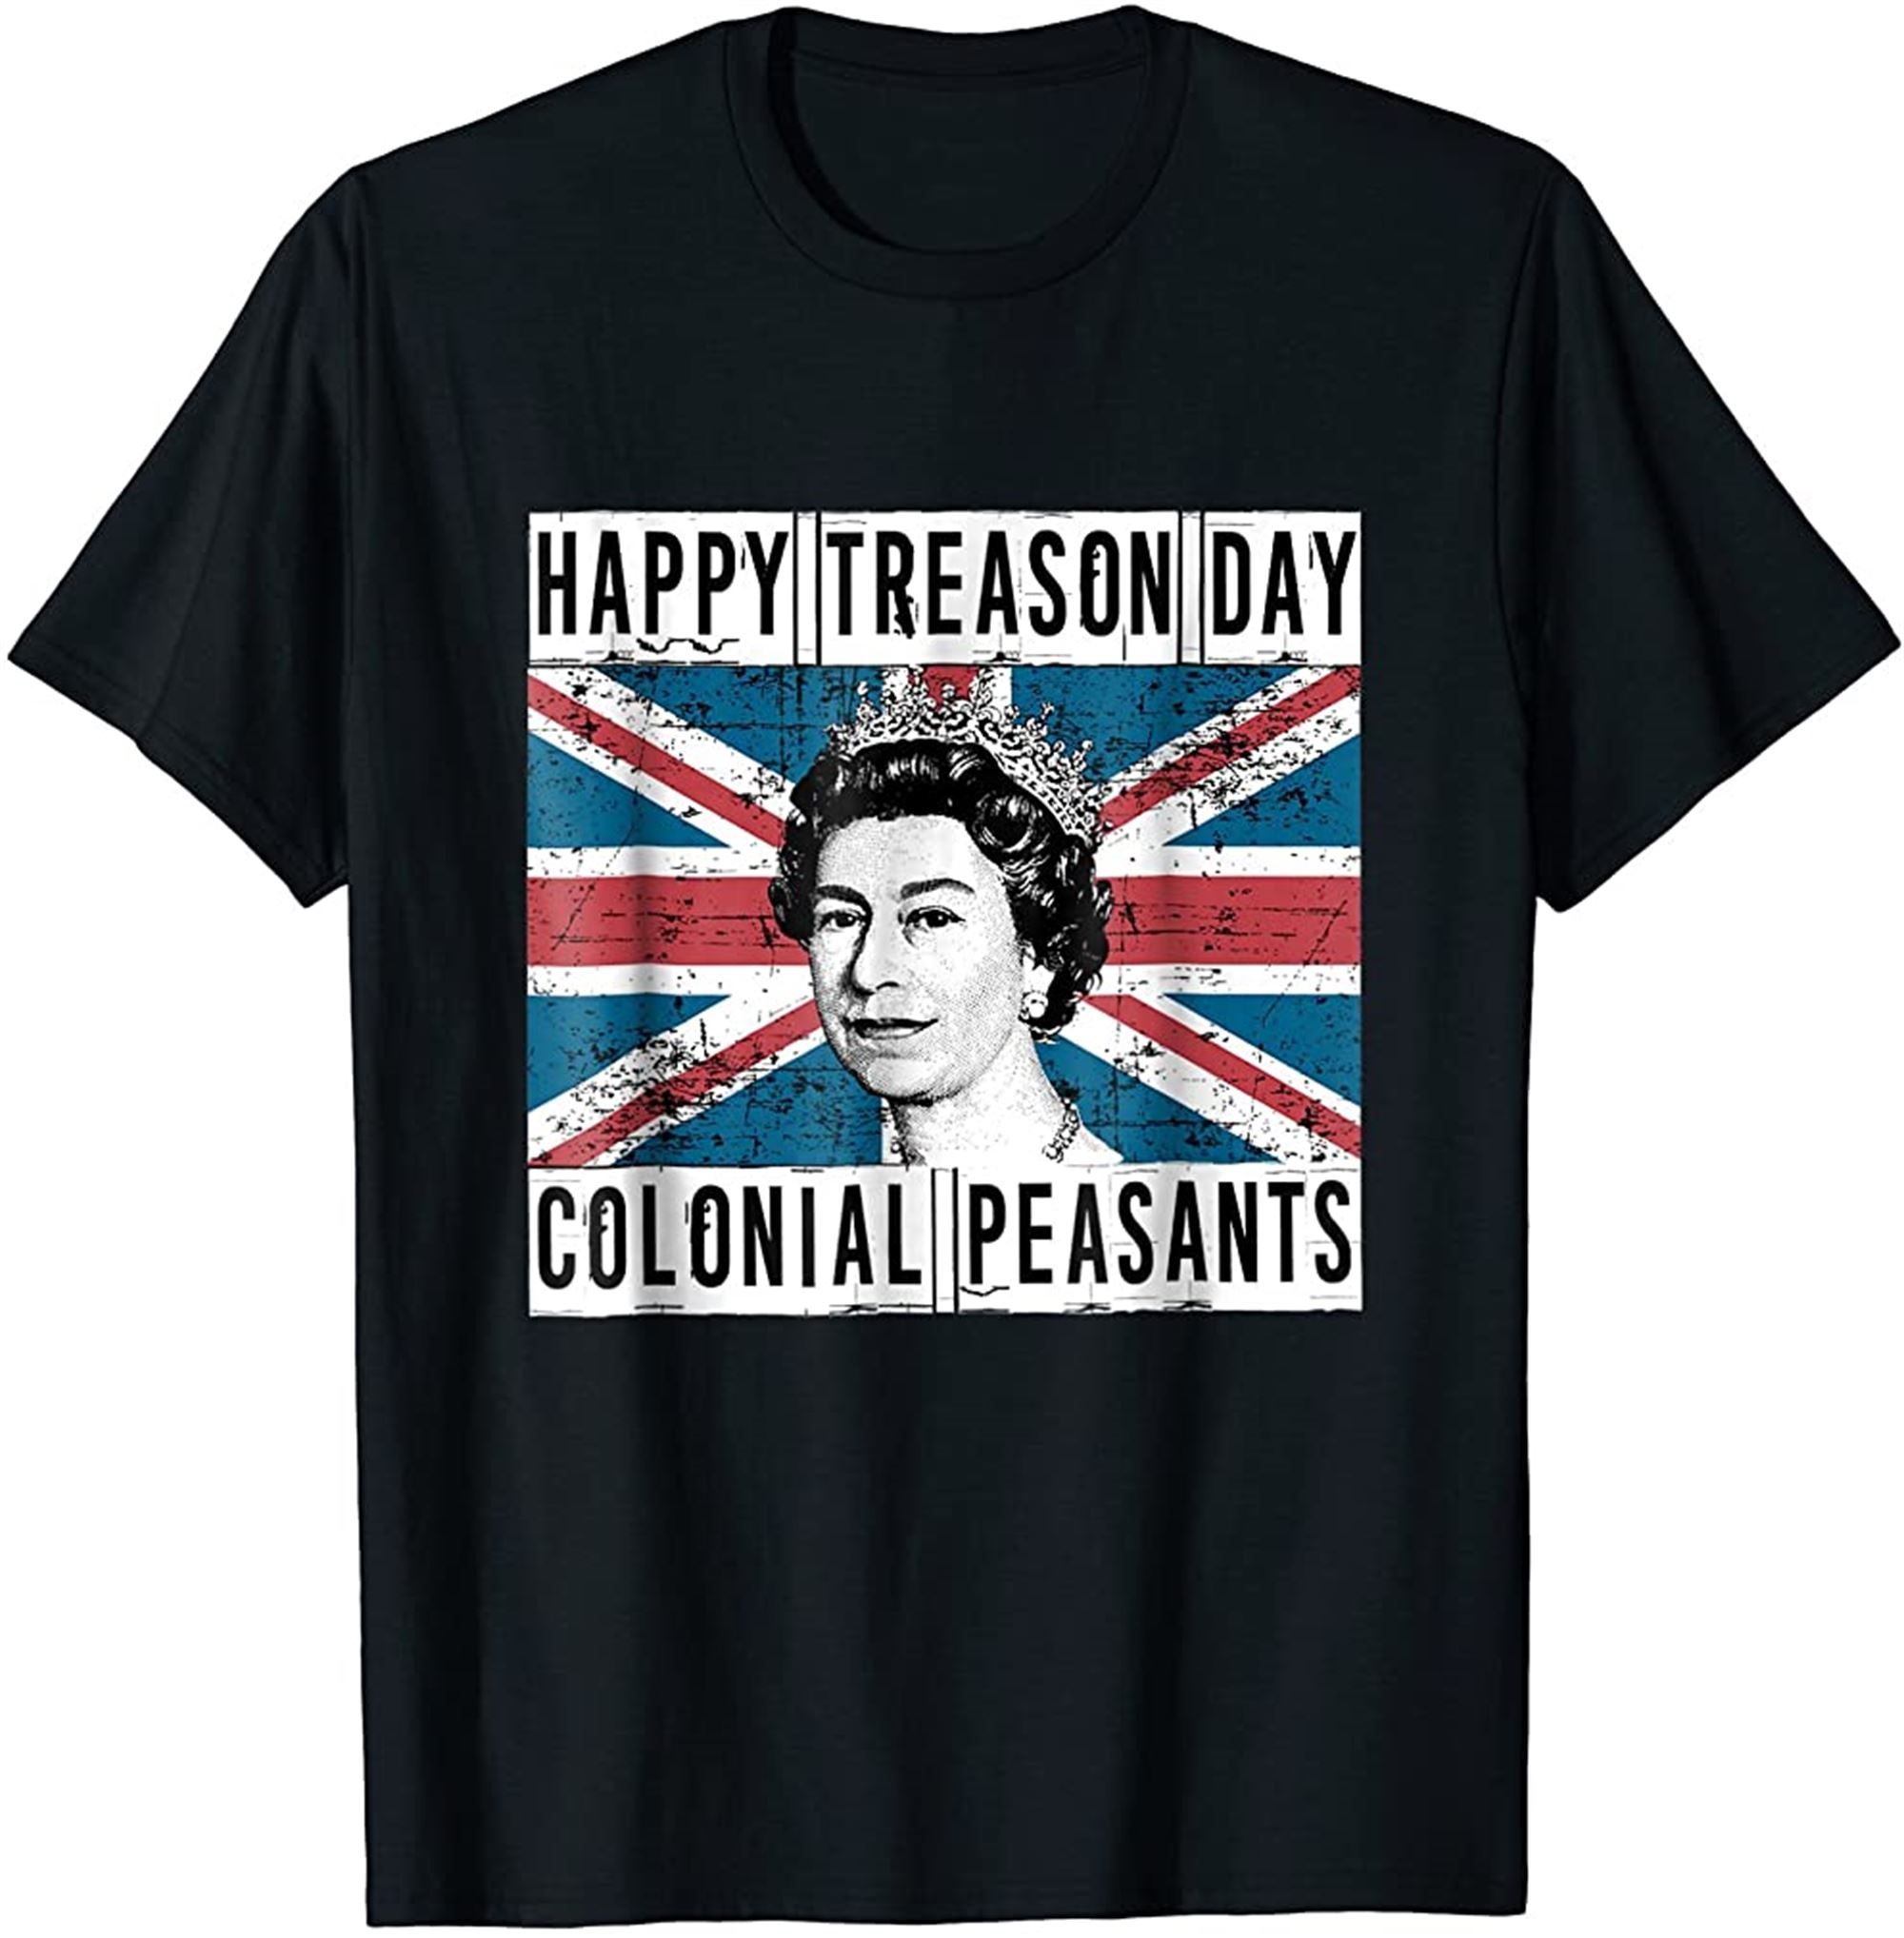 Happy Treason Day British 4th Of July T-shirt Plus Size Up To 5xl